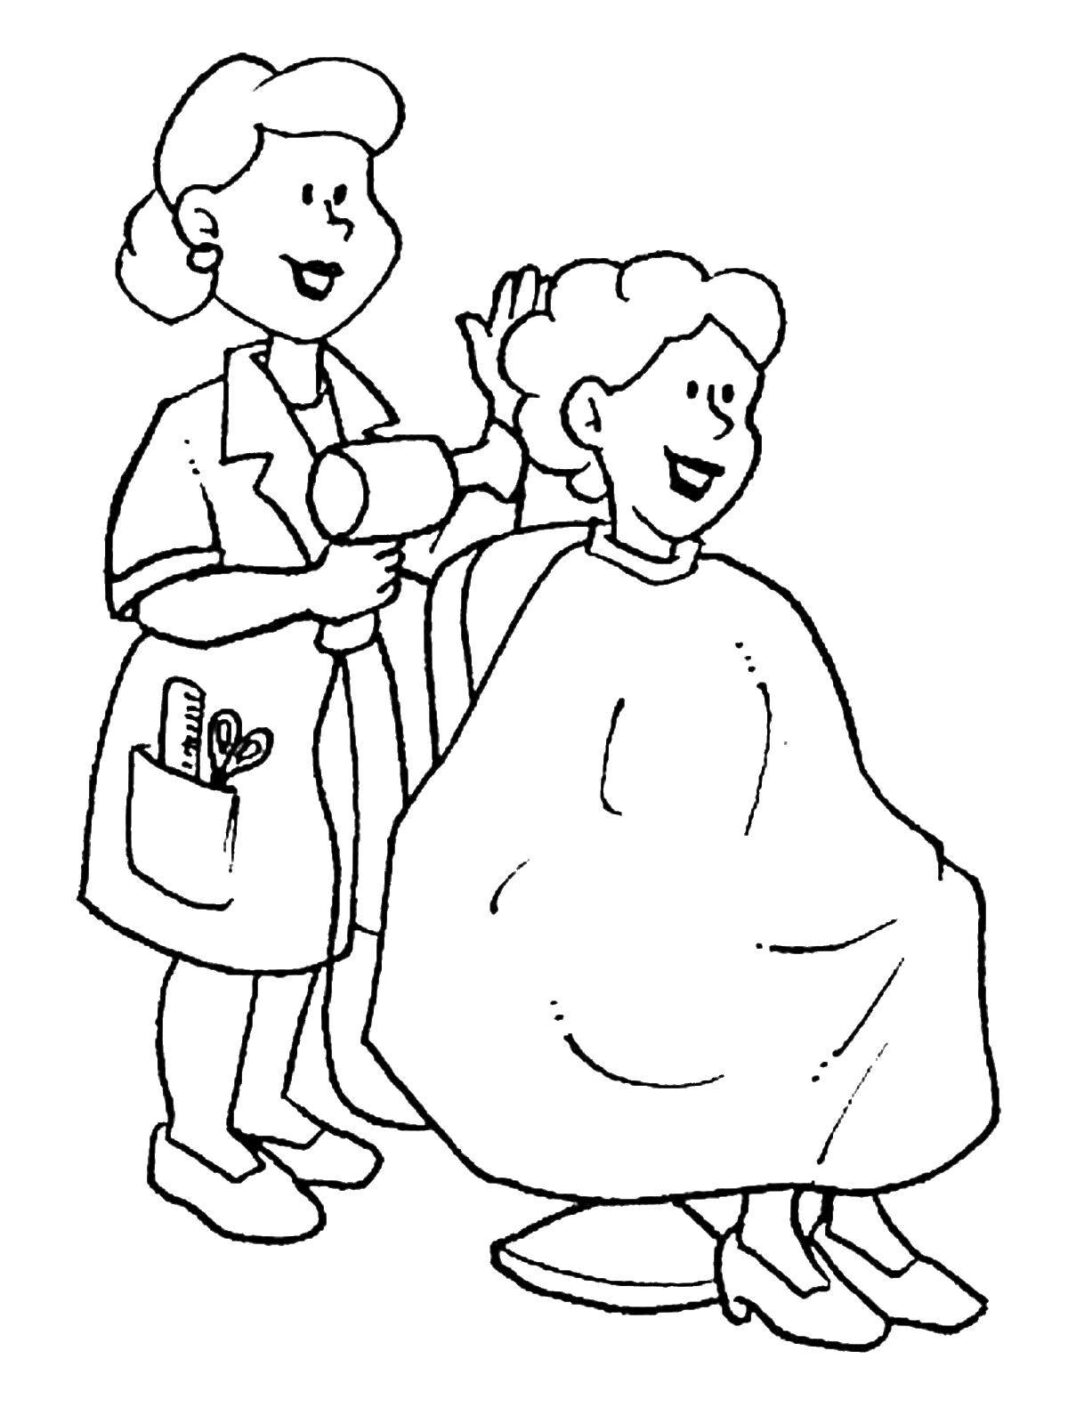 Hairdresser and Barber Coloring Pages - Best Coloring Pages For Kids